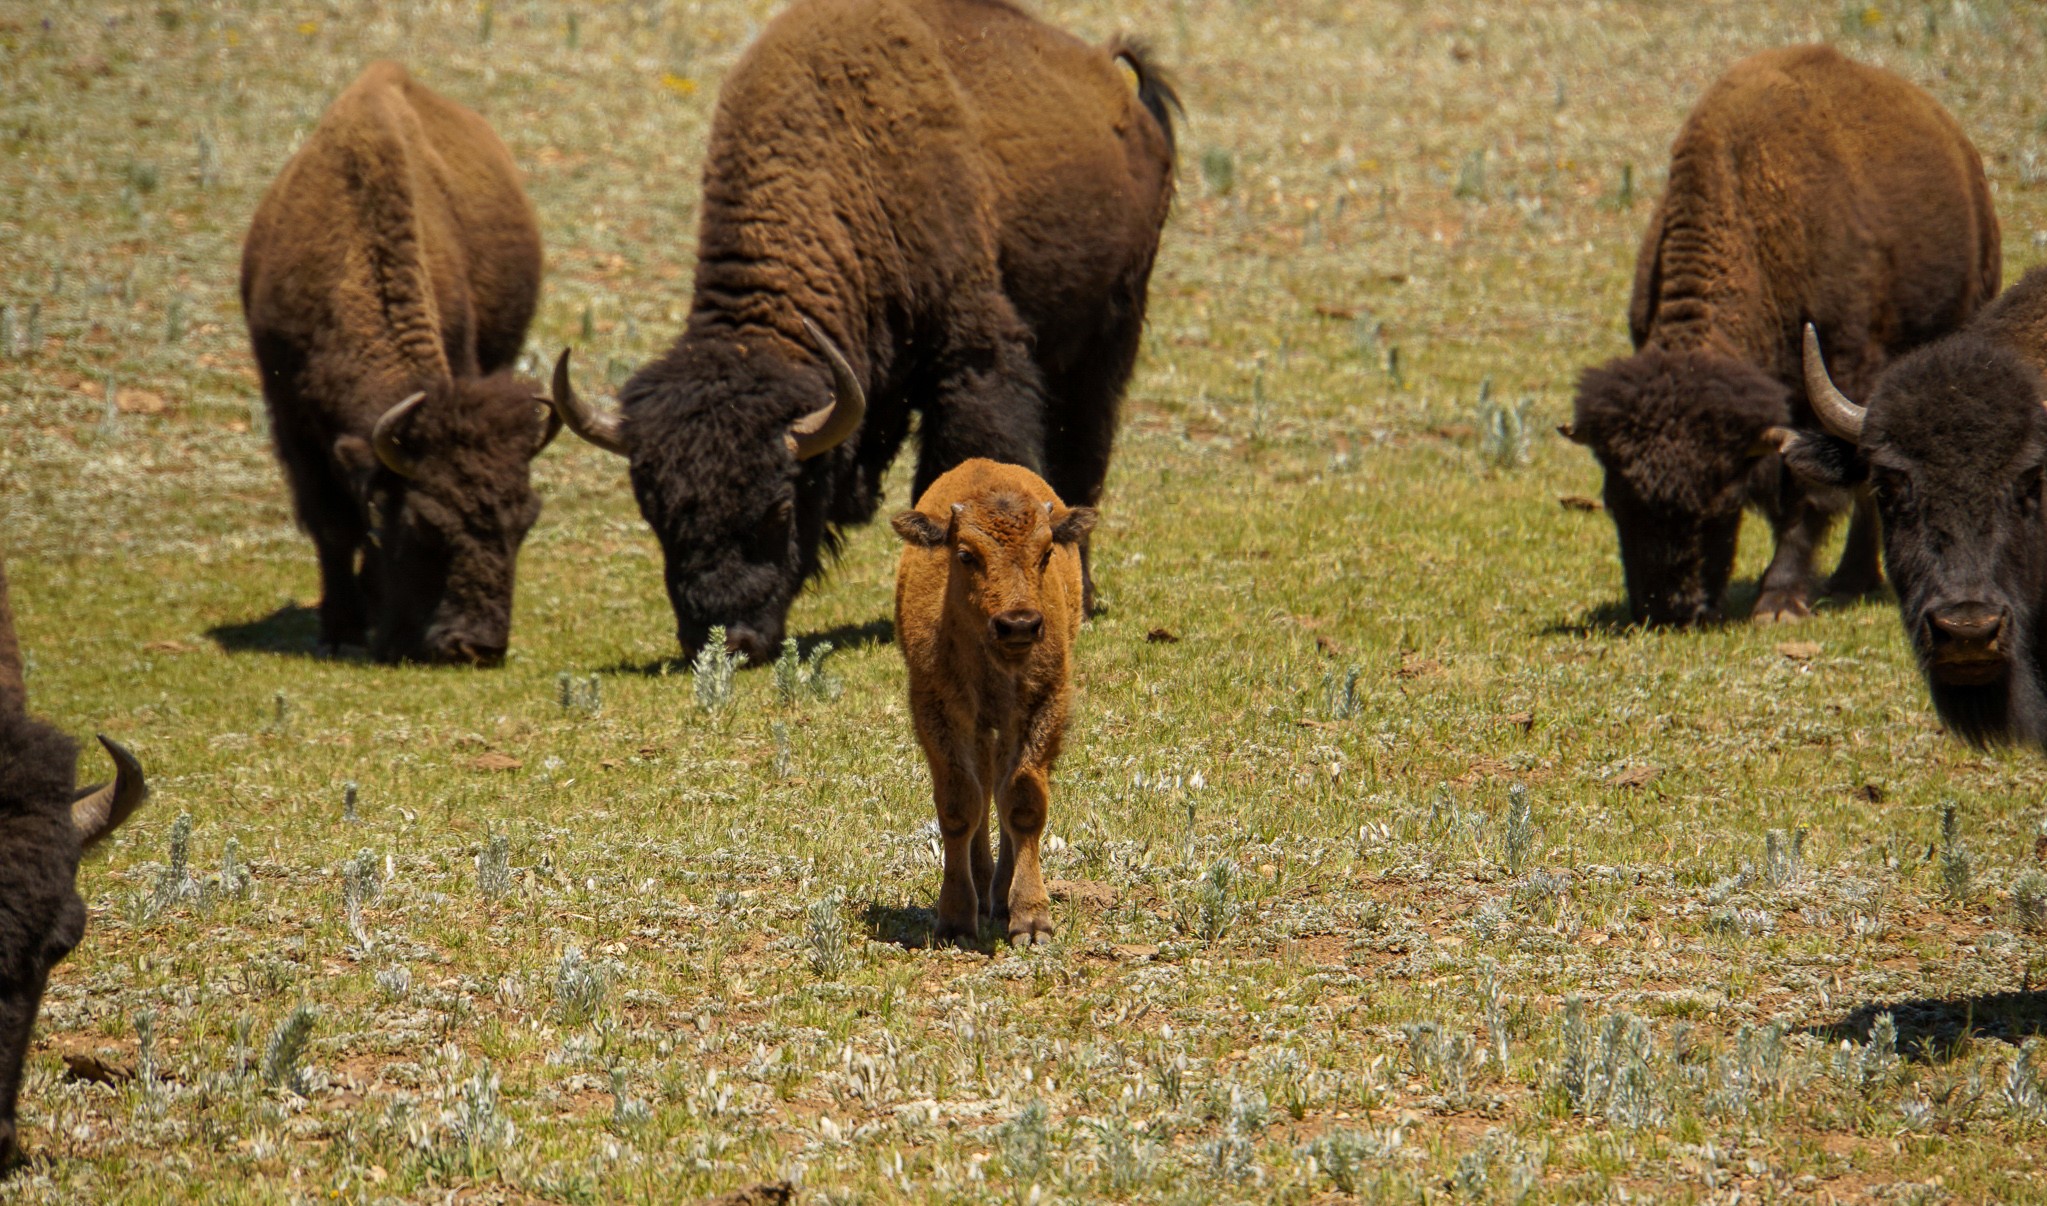 A bison calf is surrounding by adult bison in a meadow on the North Rim